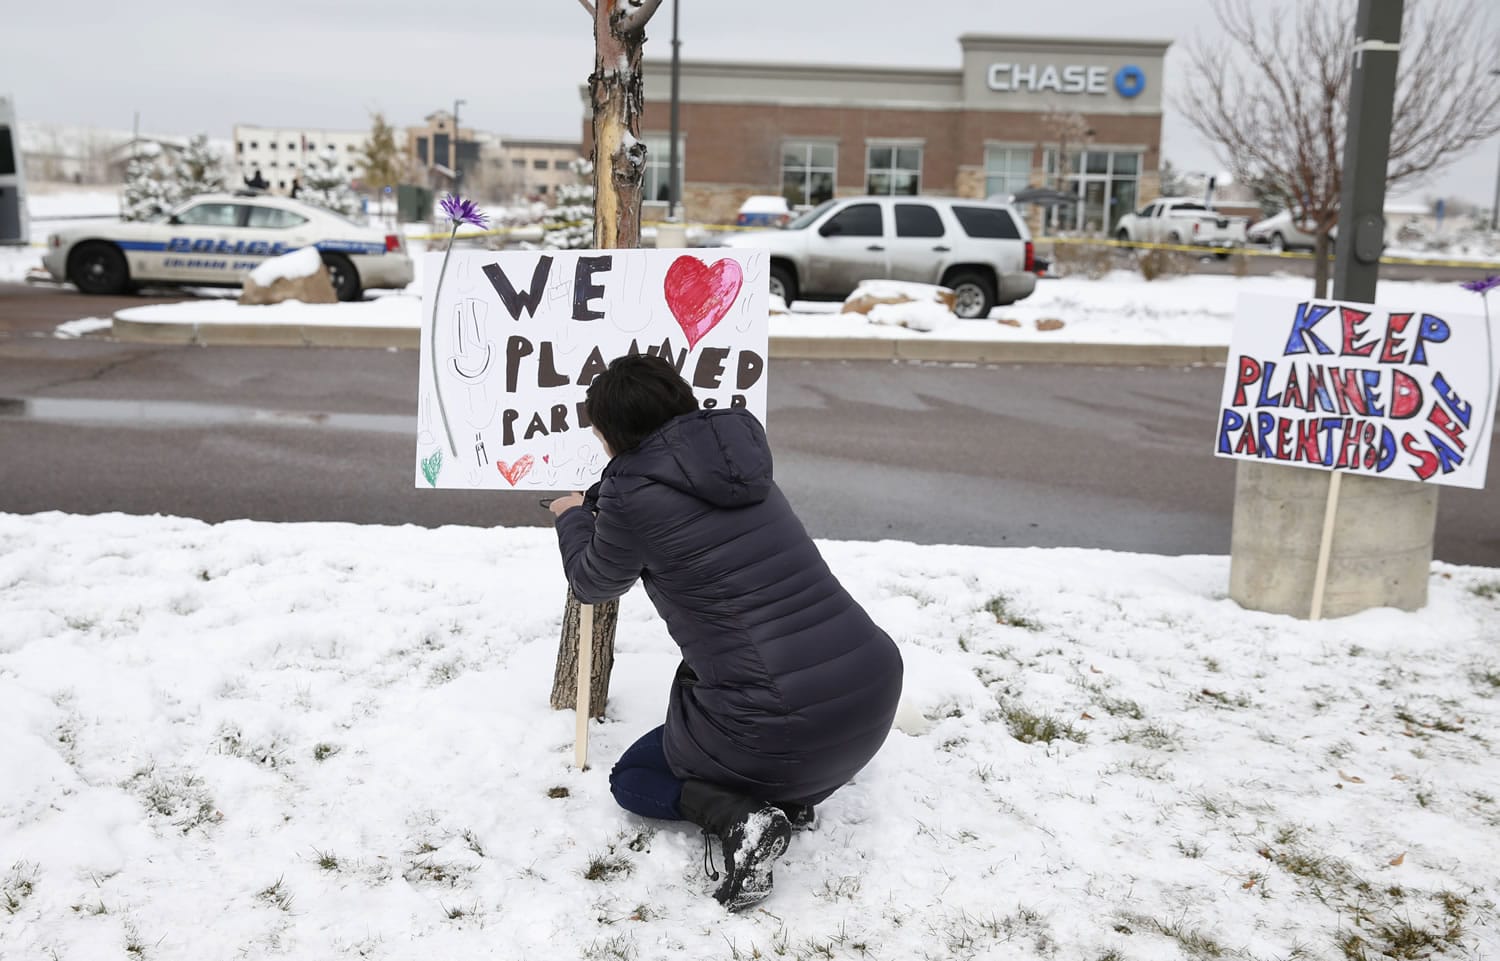 Bethany Winder, a nurse who lives in Colorado Springs, Colo., plants a sign in support of Planned Parenthood just south of its clinic as police investigators gather evidence near the scene of Friday's shooting at the clinic Sunday, Nov. 29, 2015, in northwest Colorado Springs.